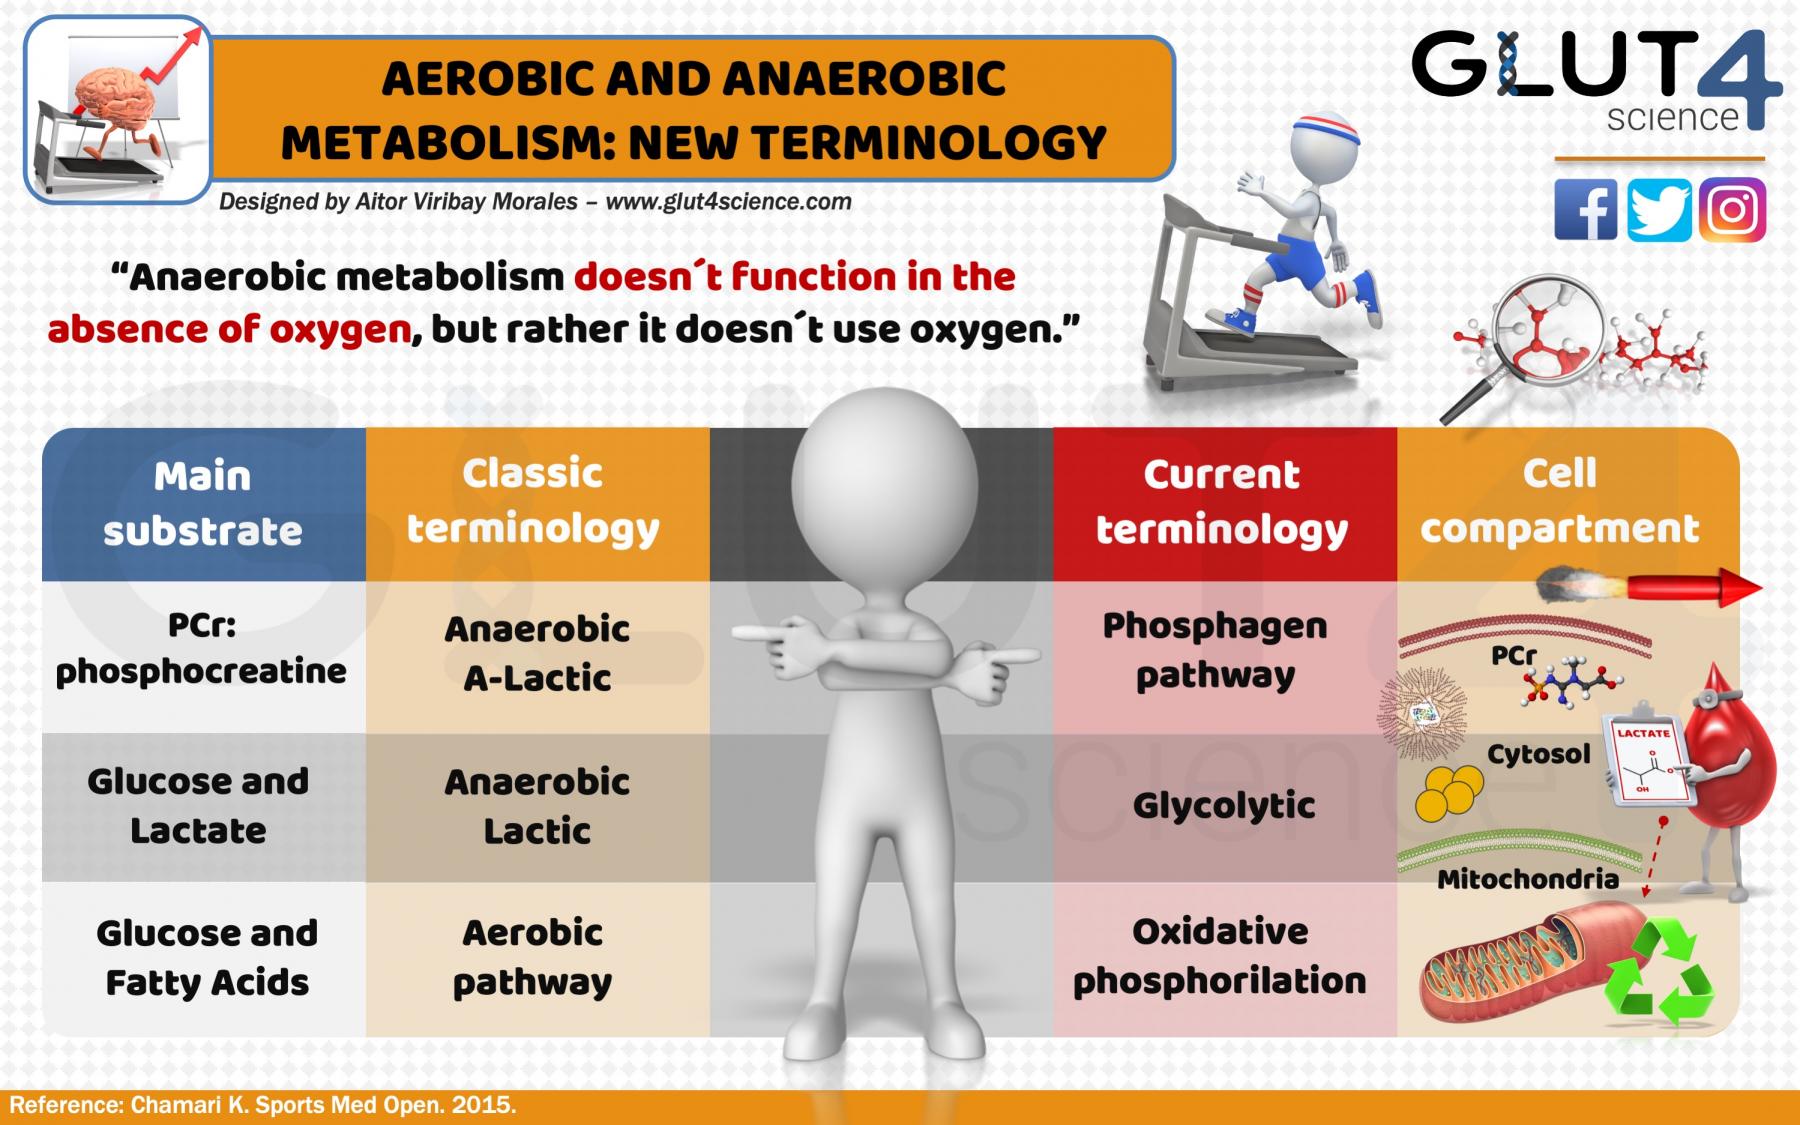 Aerobic and anaerobic: new terminology